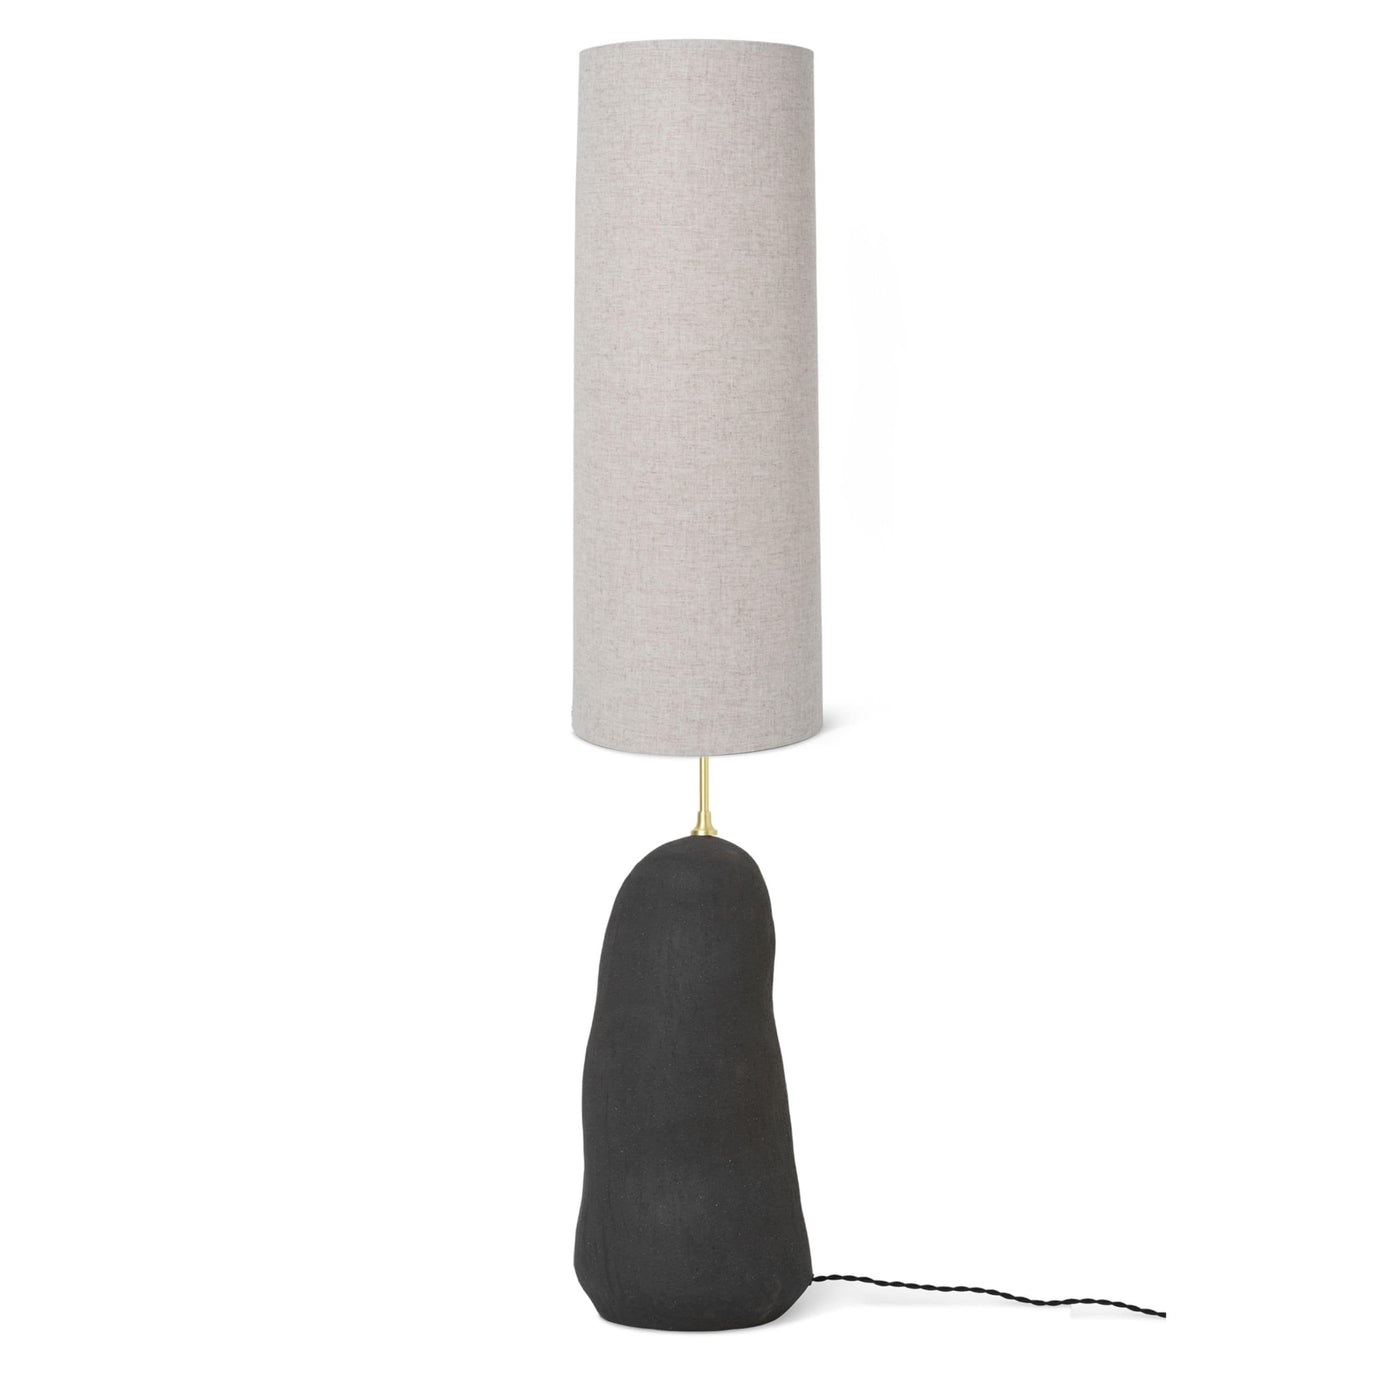 ferm living hebe lamp base large in black with a matching off-white lampshade. Available from someday designs. #colour_dark-grey